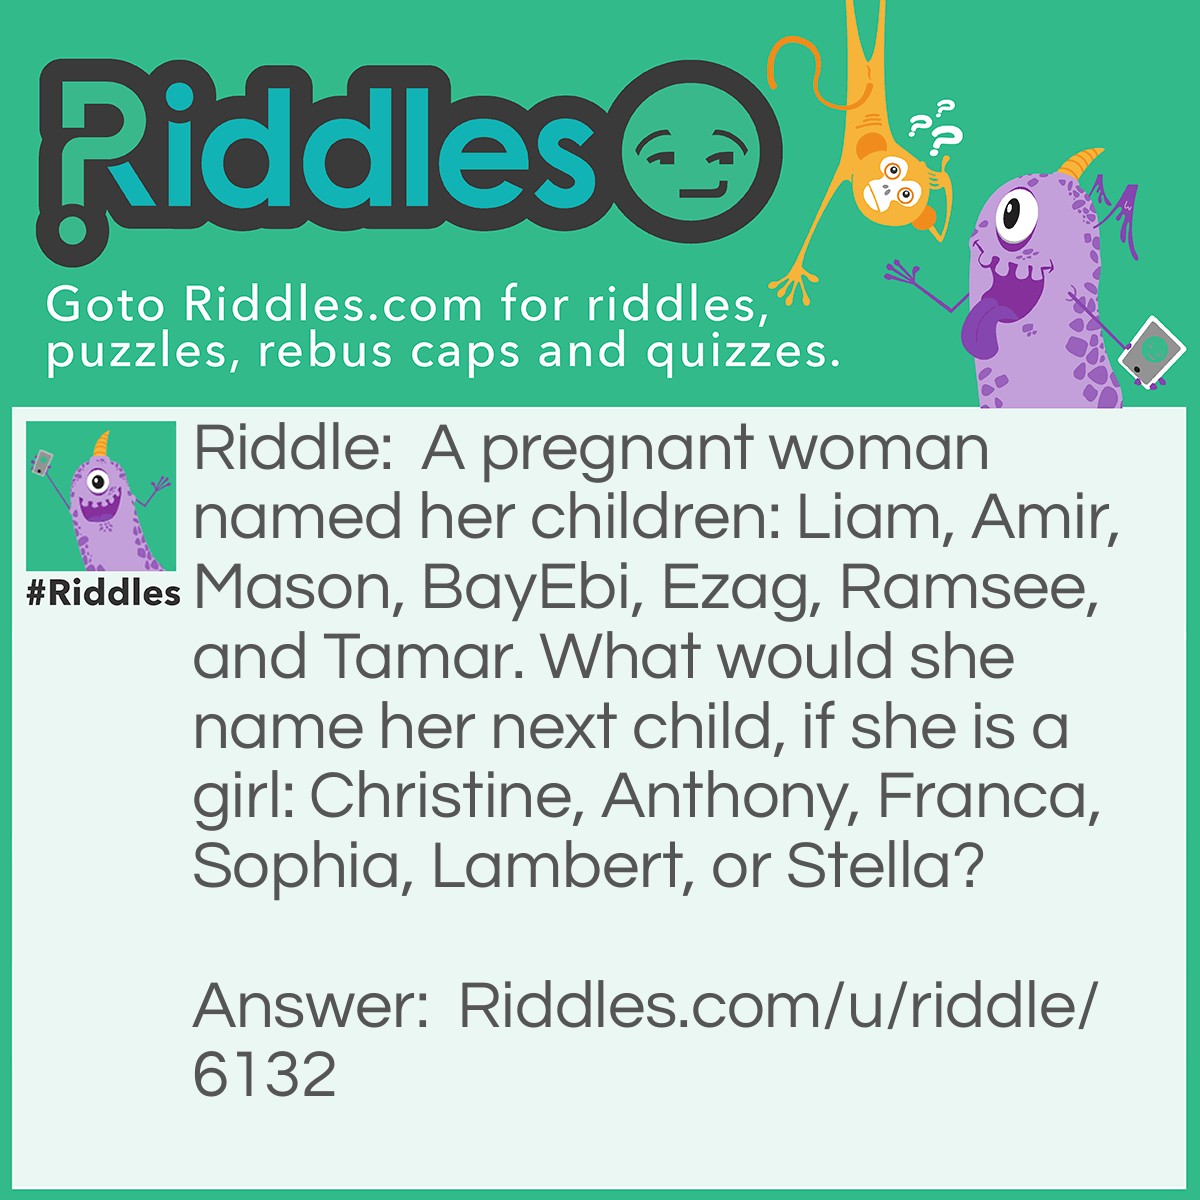 Riddle: A pregnant woman named her children: Liam, Amir, Mason, BayEbi, Ezag, Ramsee, and Tamar. What would she name her next child, if she is a girl: Christine, Anthony, Franca, Sophia, Lambert, or Stella? Answer: Lambert. She named her next child using the first letters of each of the names of her preceding children. But the little trick there is the name "Lambert", which is a male's name.